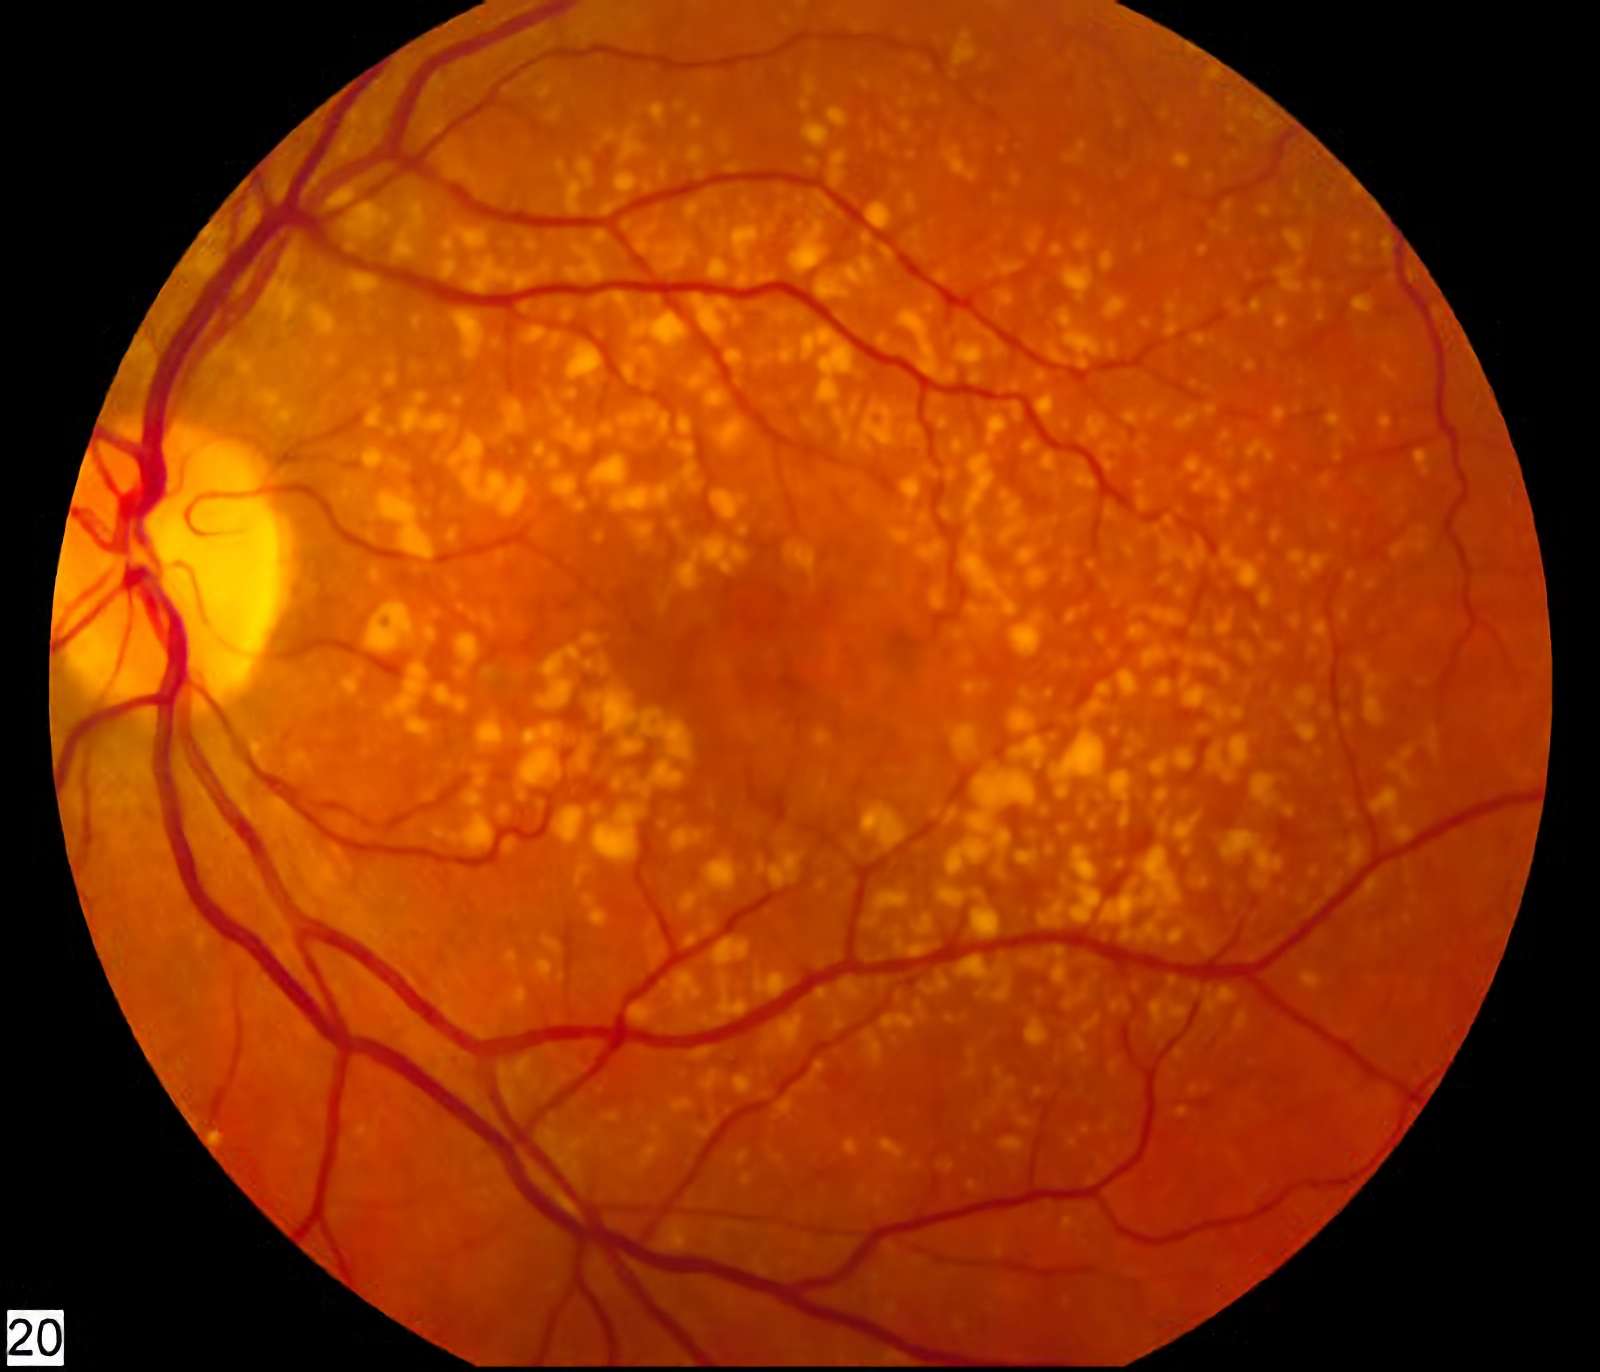 Fig. 1 Age-related macular degeneration. There are irregular pale dots at the macula, which are called drusen. （From Wikipedia: https://commons.wikimedia.org/wiki/File:Intermediate_age_related_macular_degeneration.jpg)